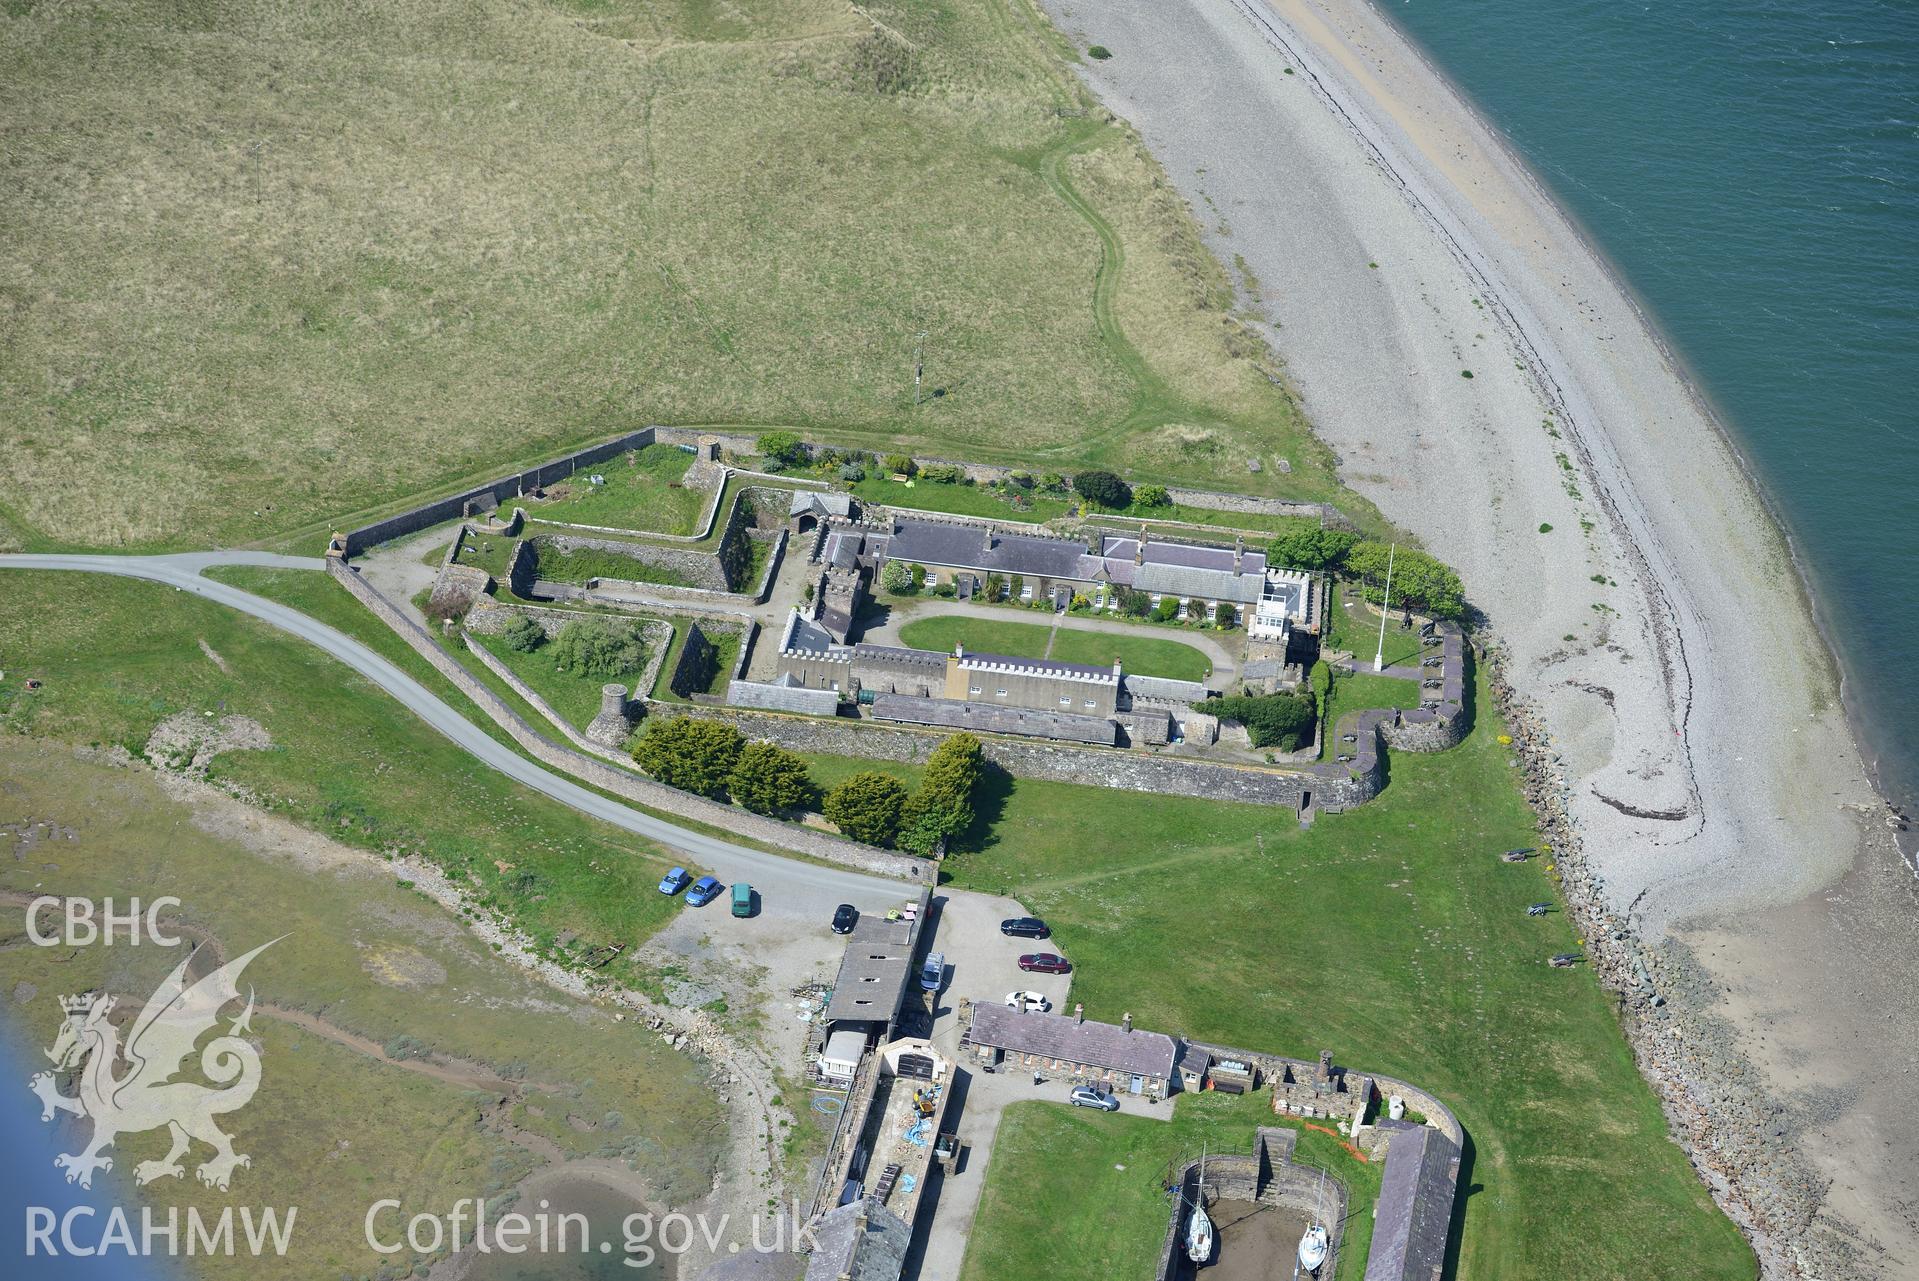 Aerial photography of Fort Belan taken on 3rd May 2017.  Baseline aerial reconnaissance survey for the CHERISH Project. ? Crown: CHERISH PROJECT 2017. Produced with EU funds through the Ireland Wales Co-operation Programme 2014-2020. All material made fr